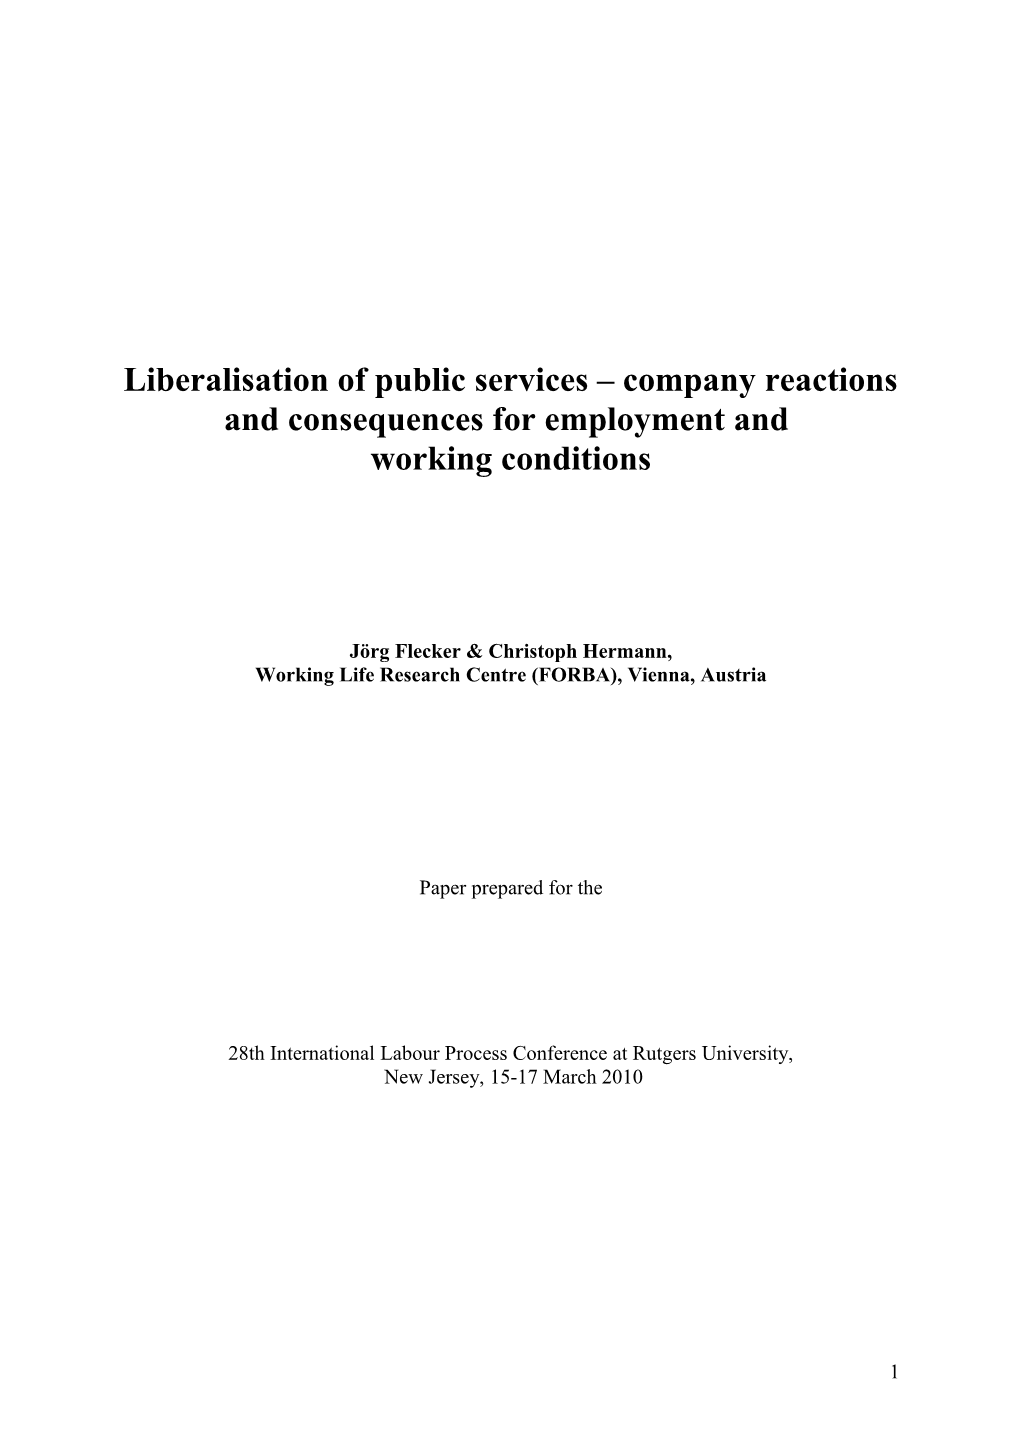 Although There Were Various Types of Public Enterprises in the Postwar Decades, Performing